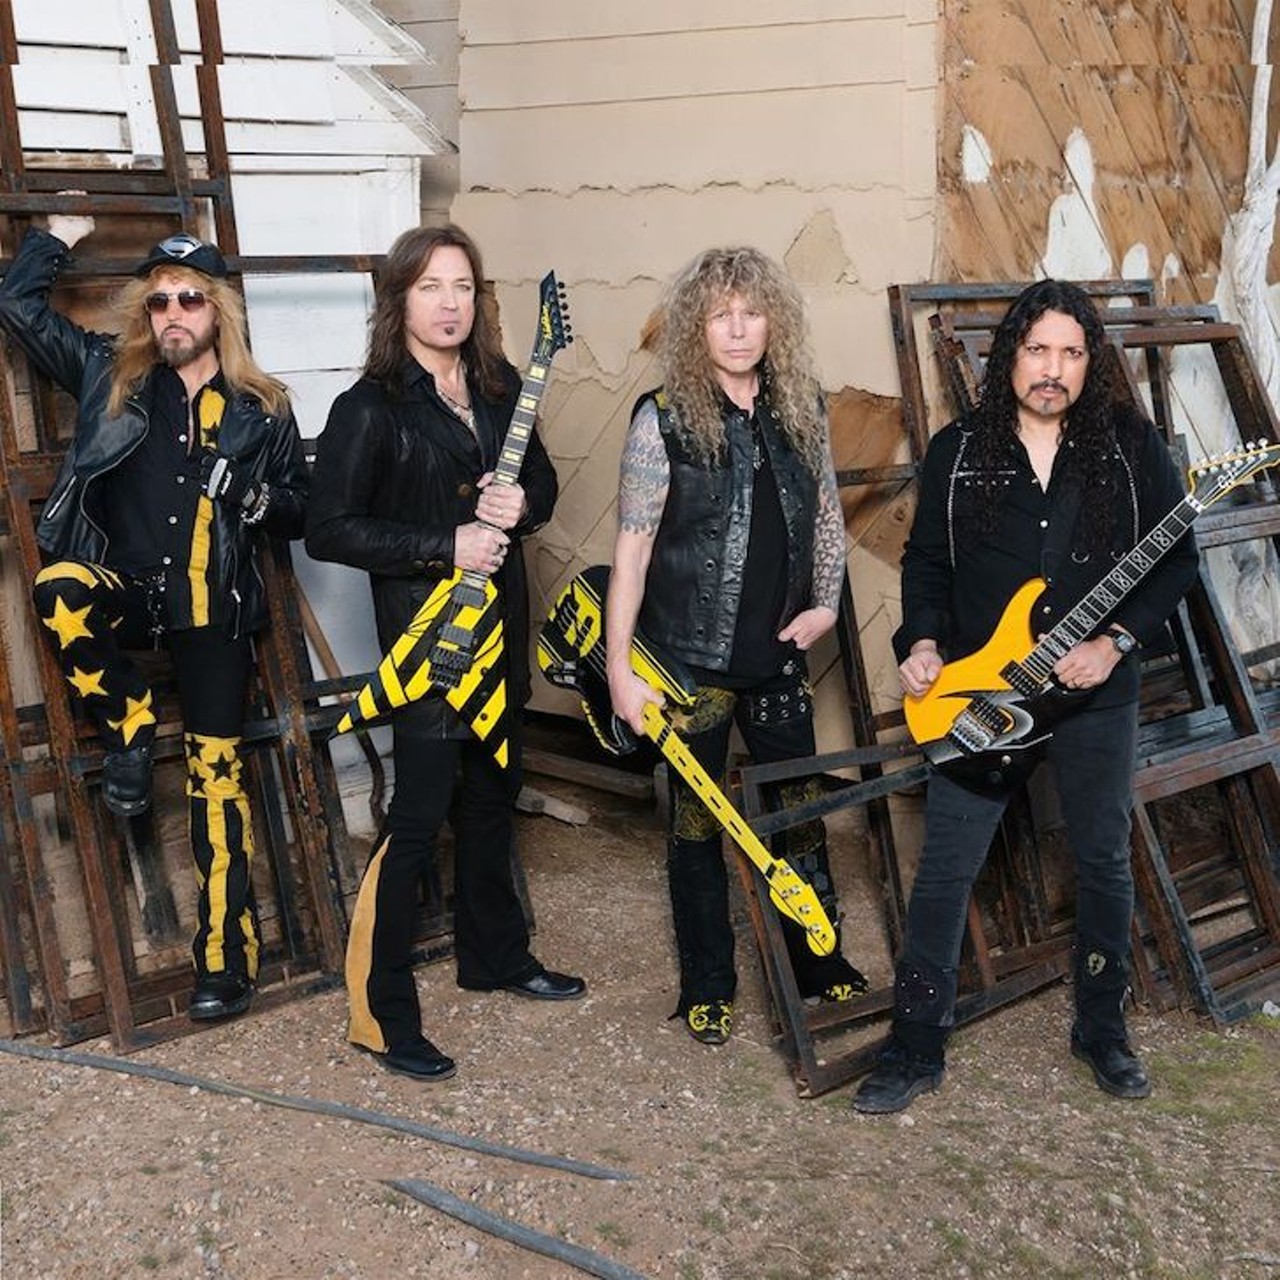 Friday, Feb. 7Stryper at House of Blues